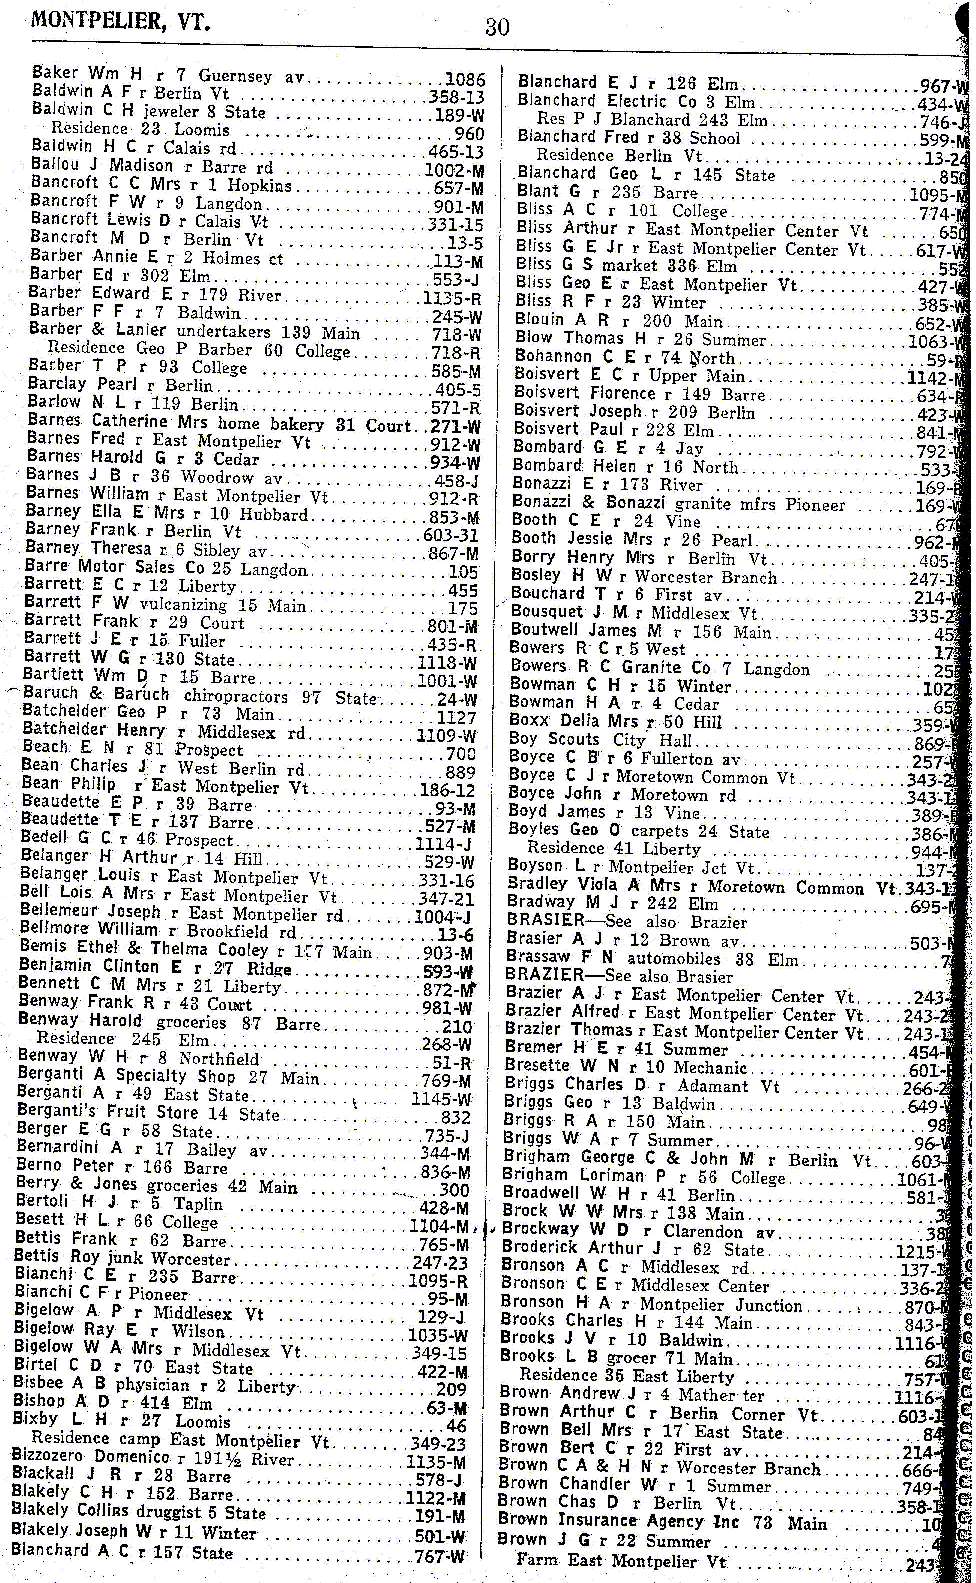 1928 Montpelier Vt Telephone Book - Page 30